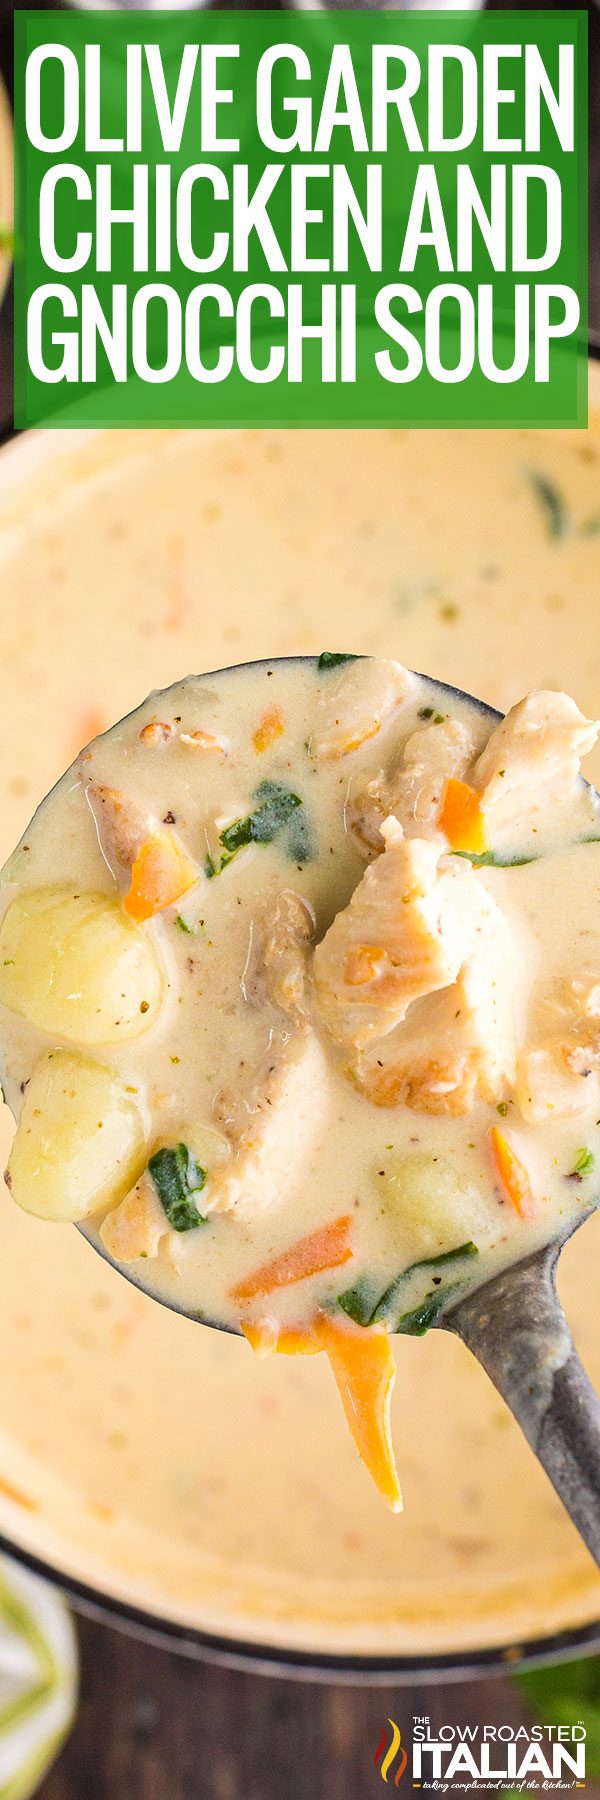 titled image (and shown): olive garden gnocchi soup